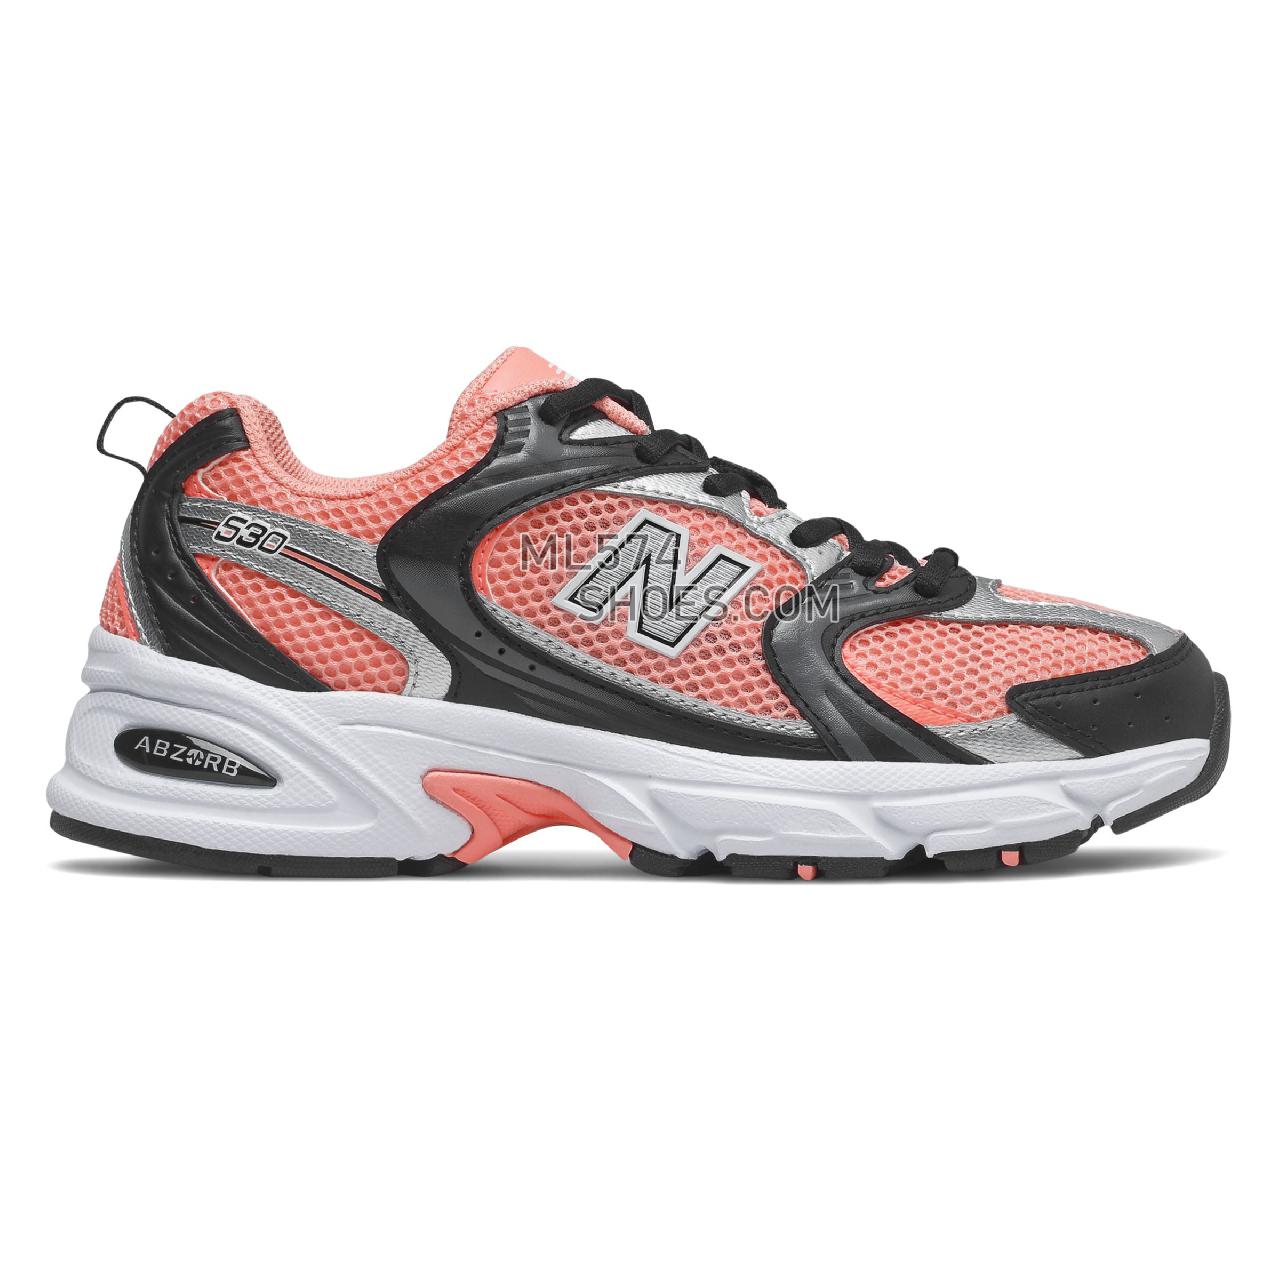 New Balance 530 - Unisex Men's Women's Classic Sneakers - Paradise Pink with Magnet - MR530MET